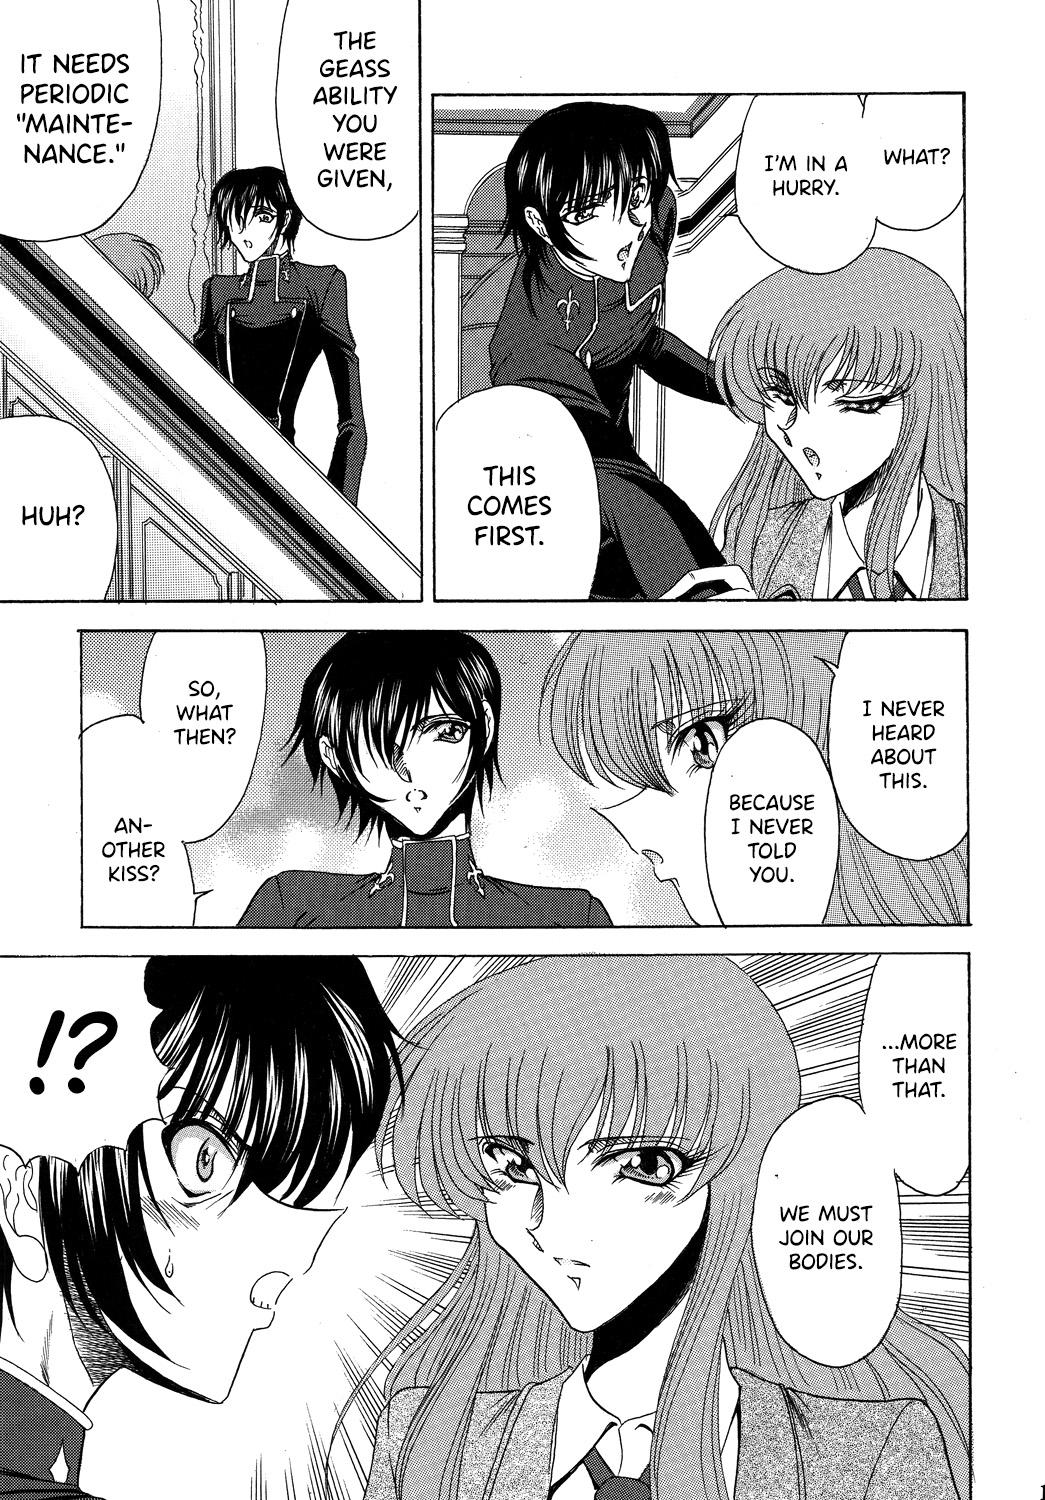 Anal Fuck ZONE 43 Lelouch of the God Speed - Code geass Stream - Page 10